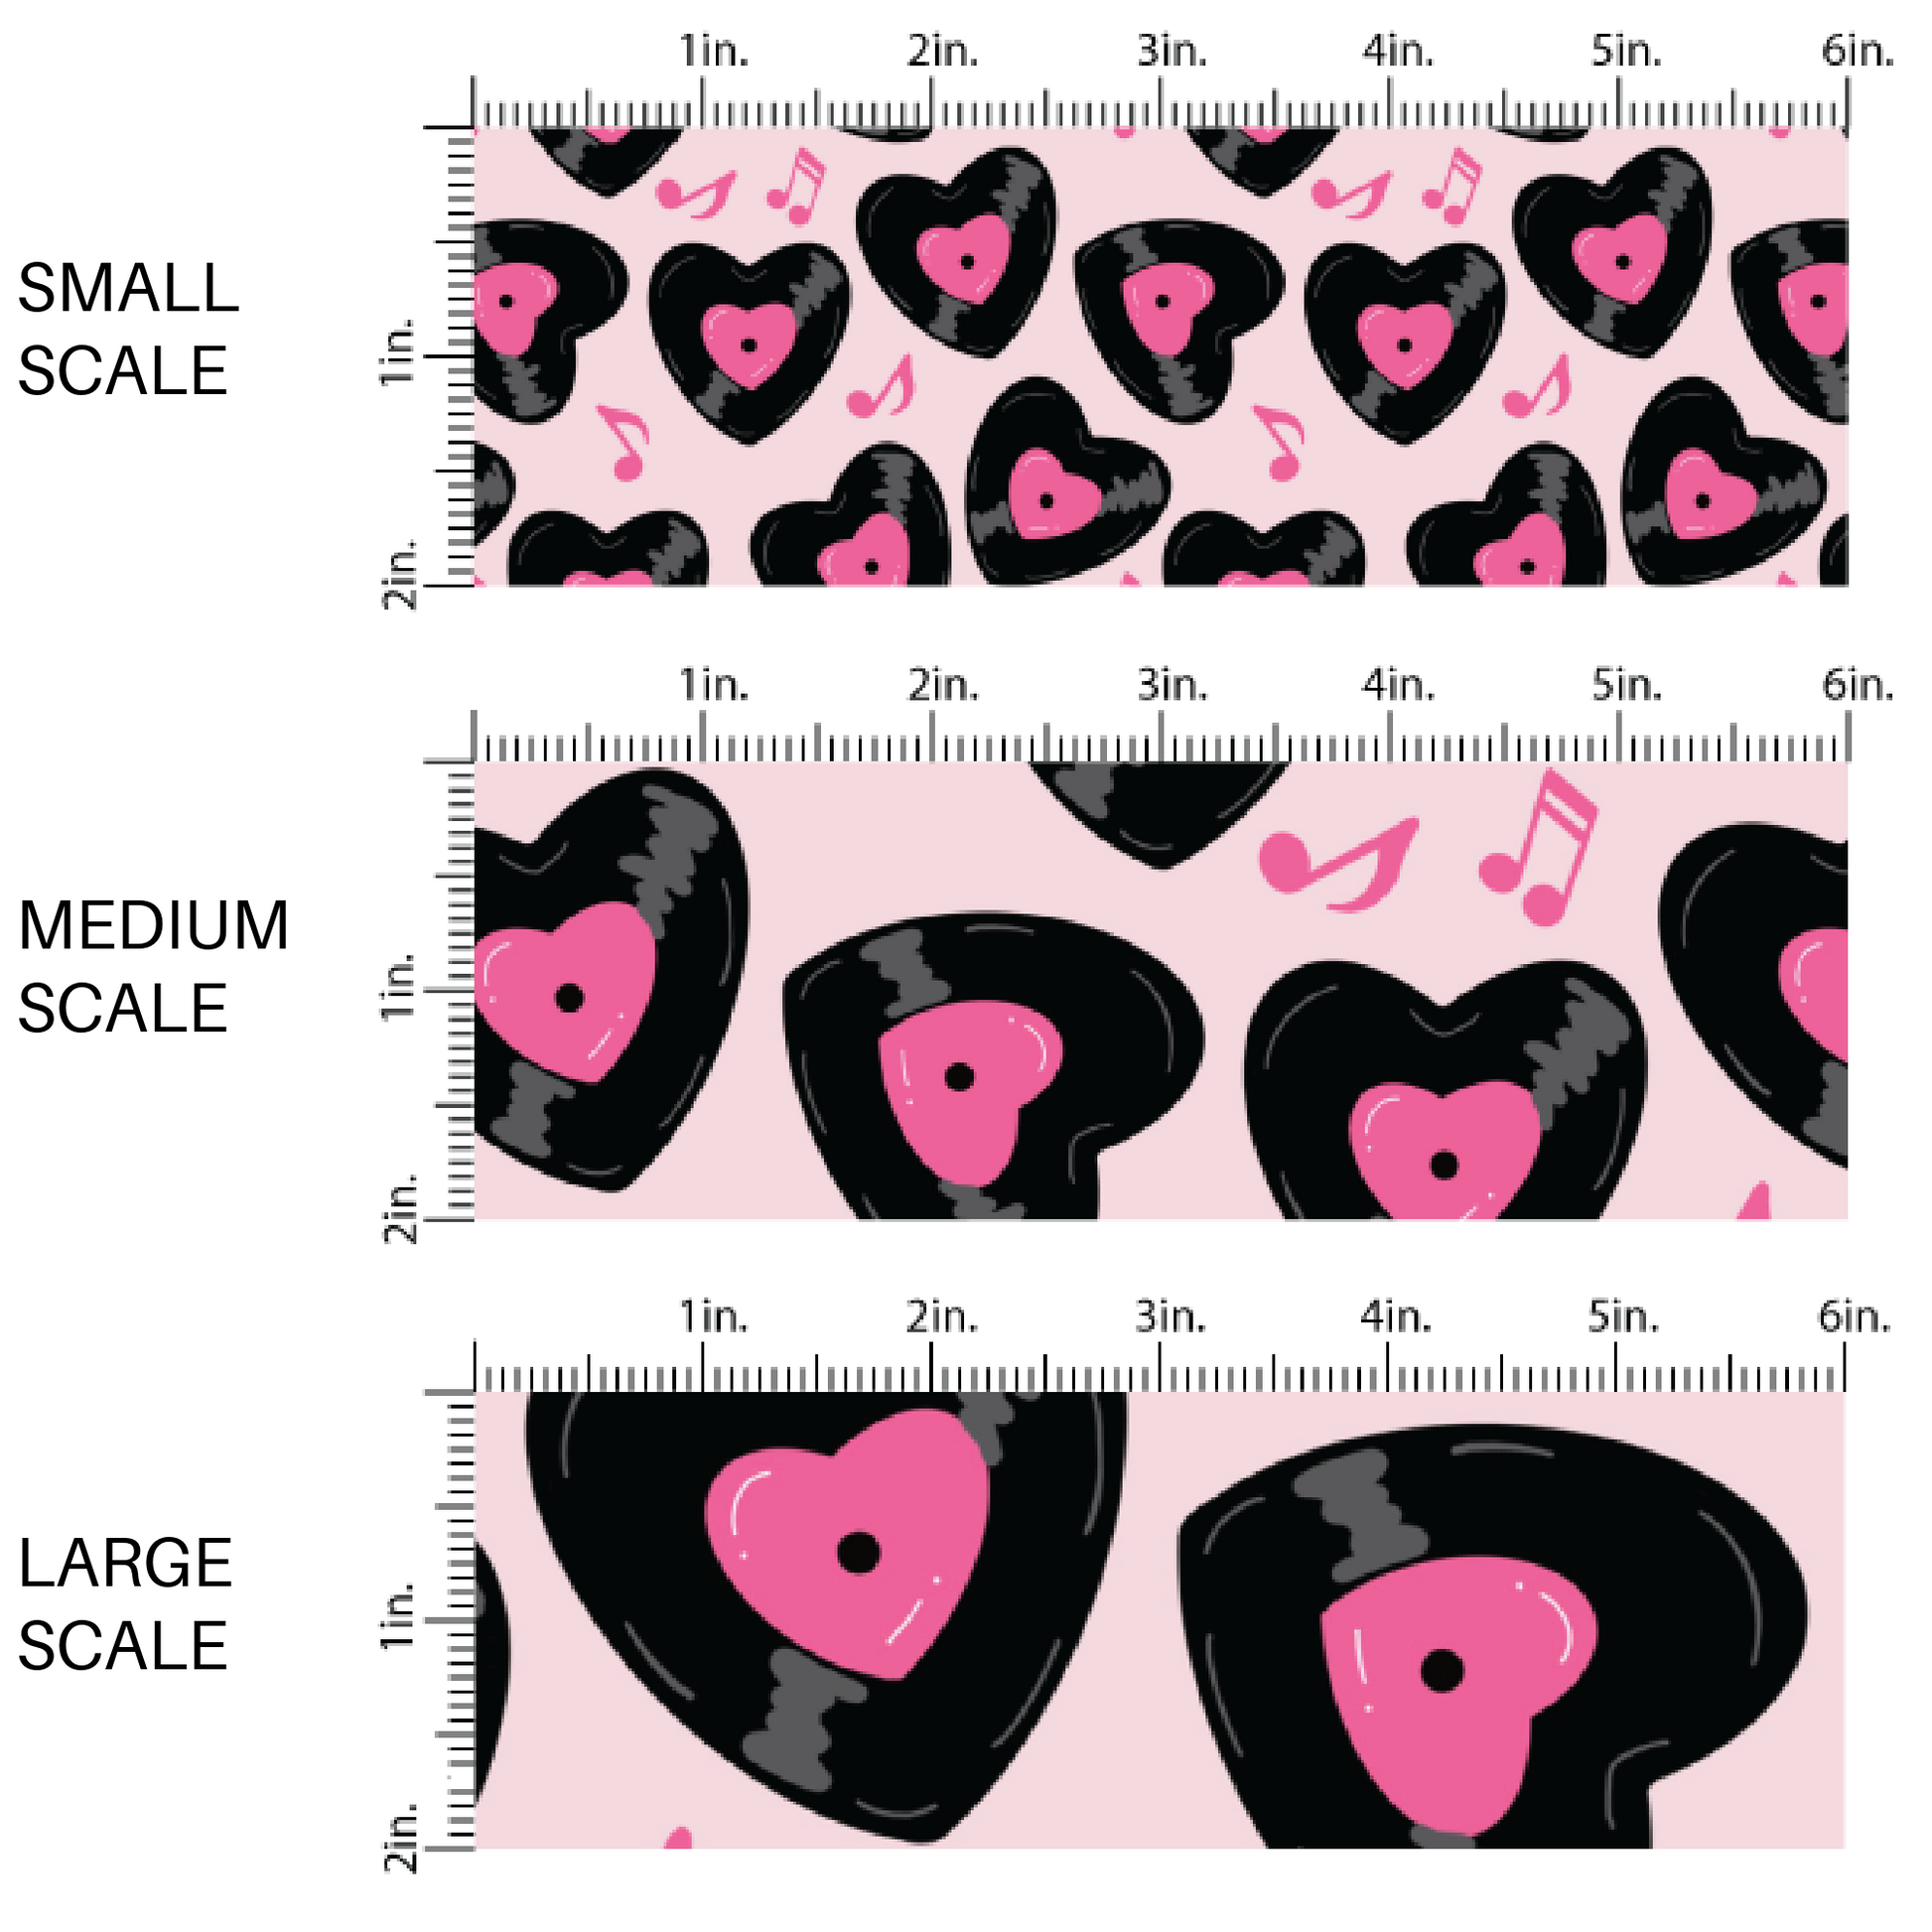 Heart Shaped Vinyl's and Pink Music Notes on Pink Fabric by the Yard scaled image guide.